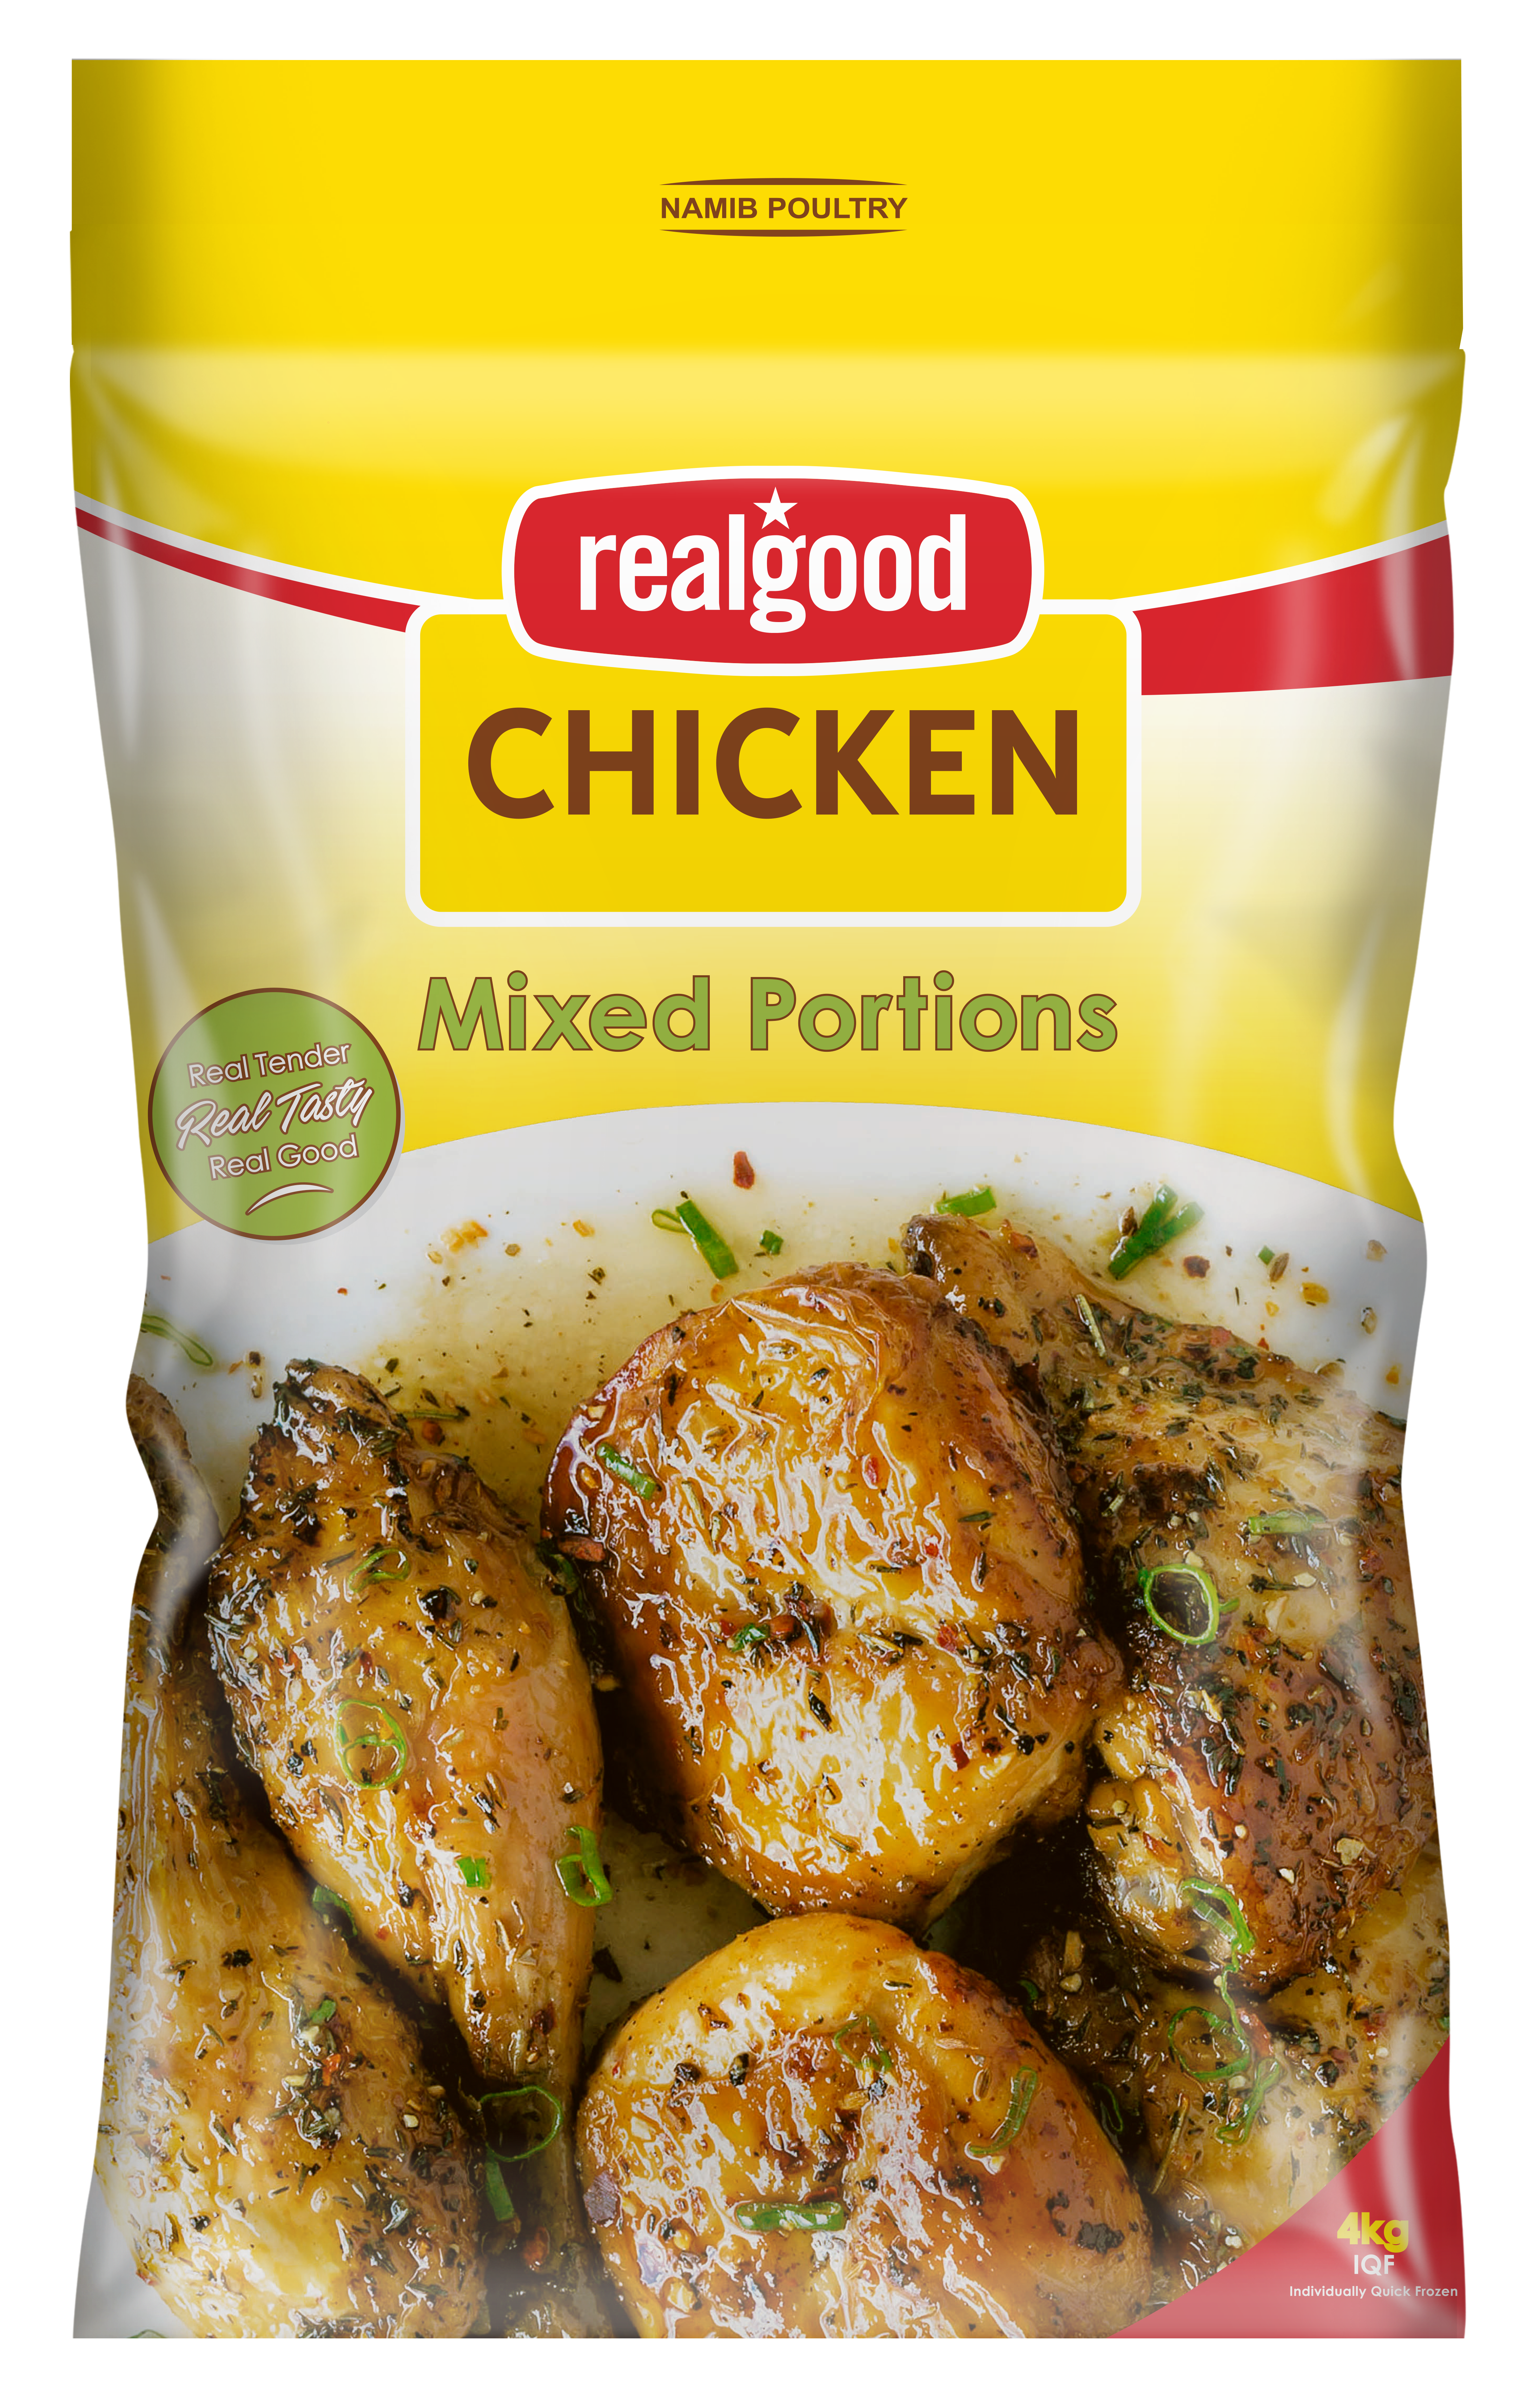 REAL GOOD IQF MIXED PORTIONS 4KG